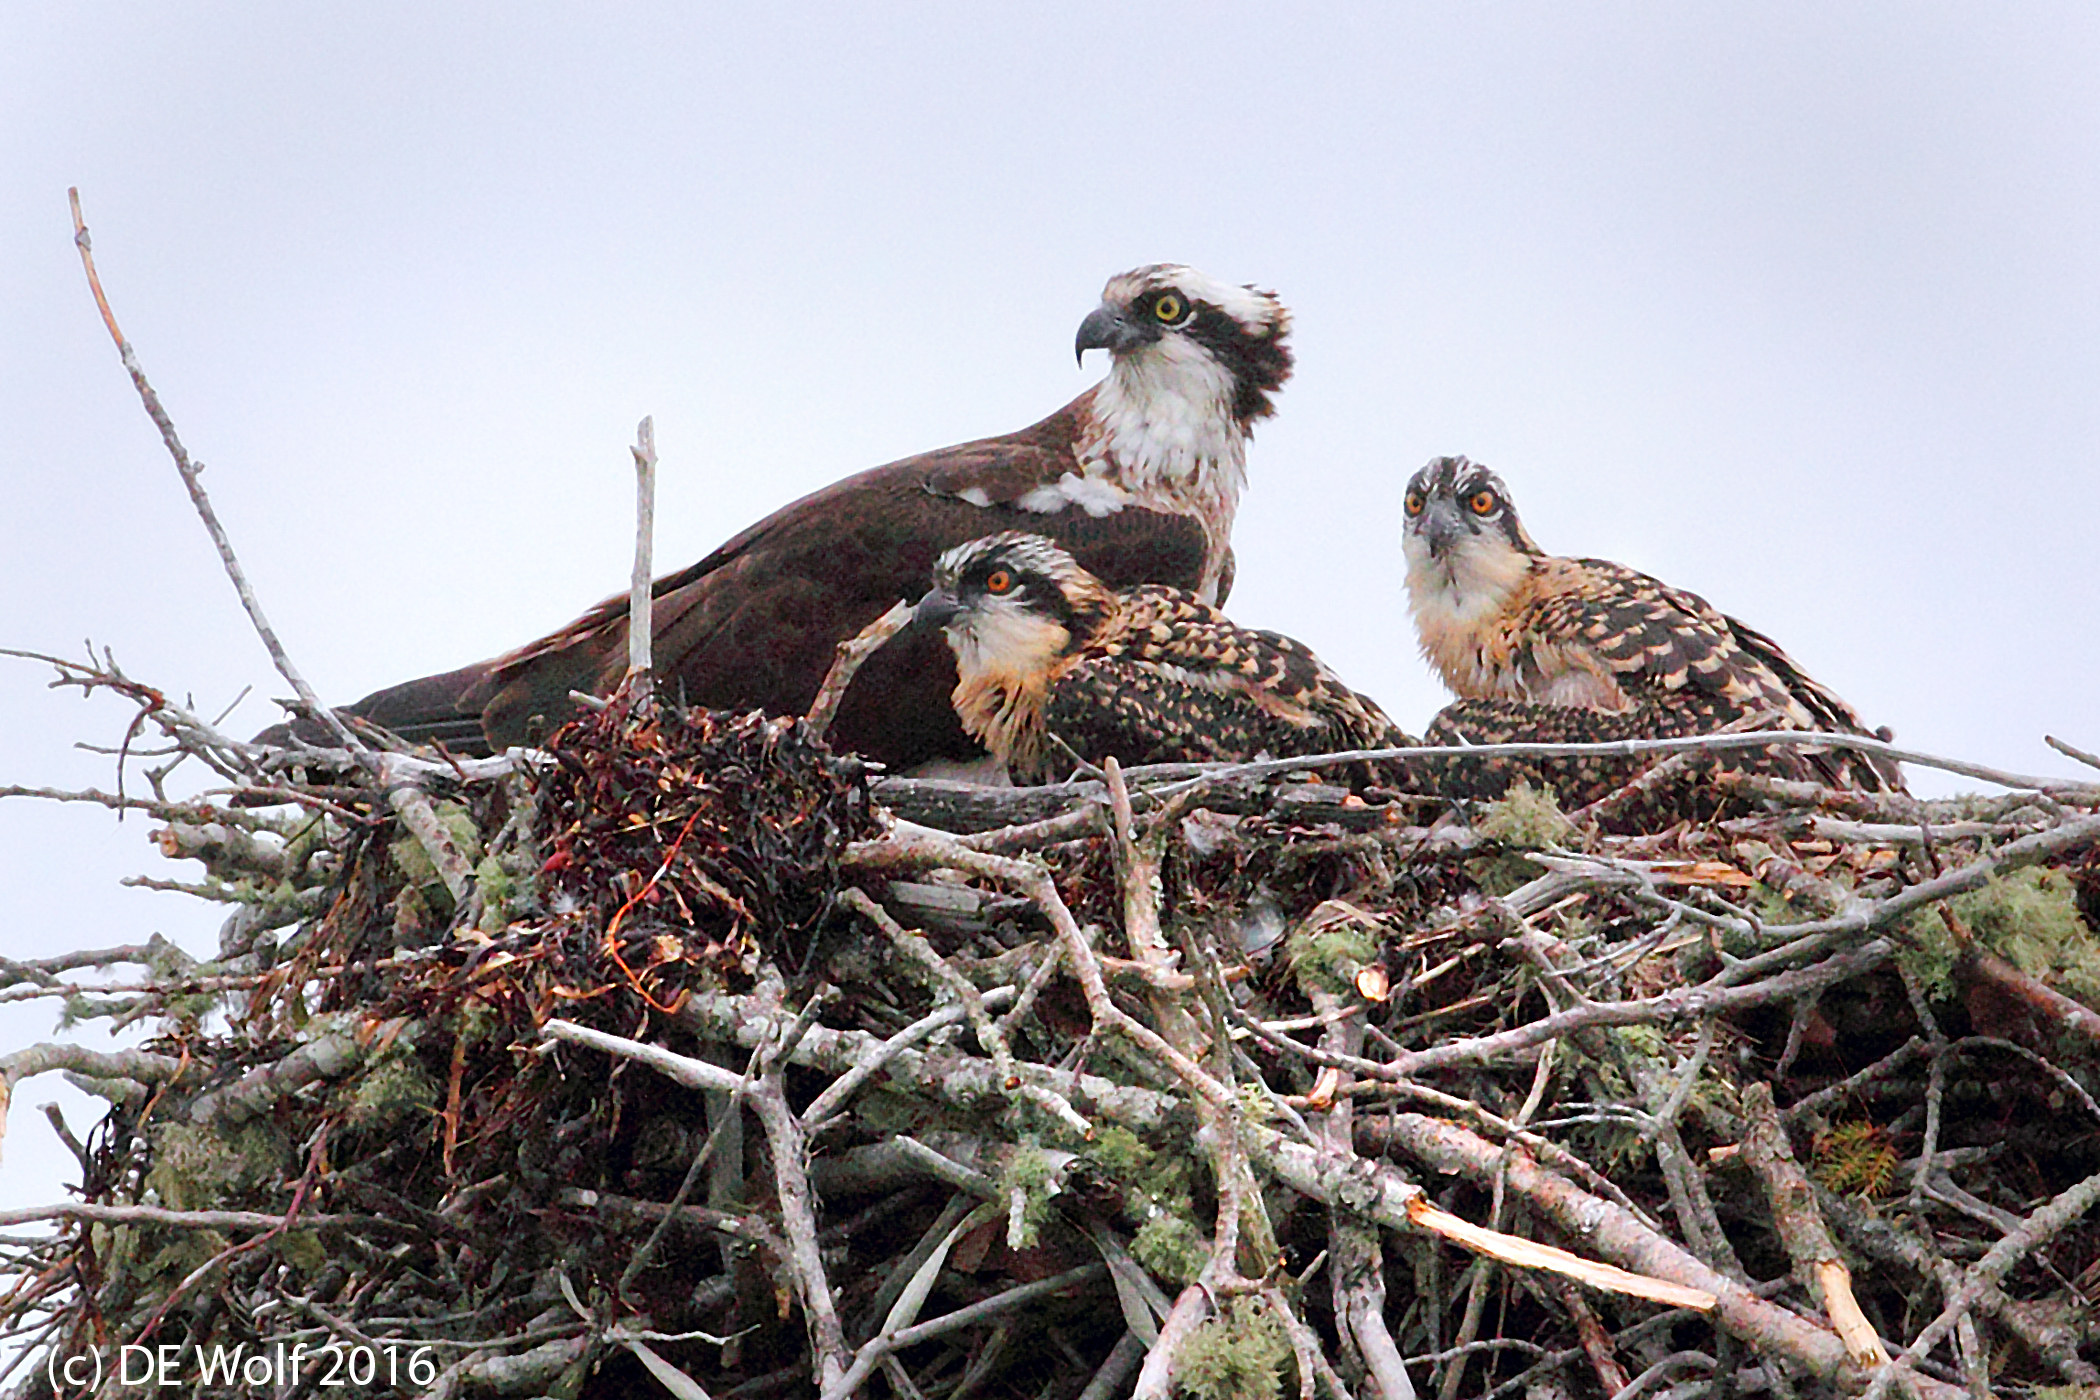 8. Osprey mother and chicks